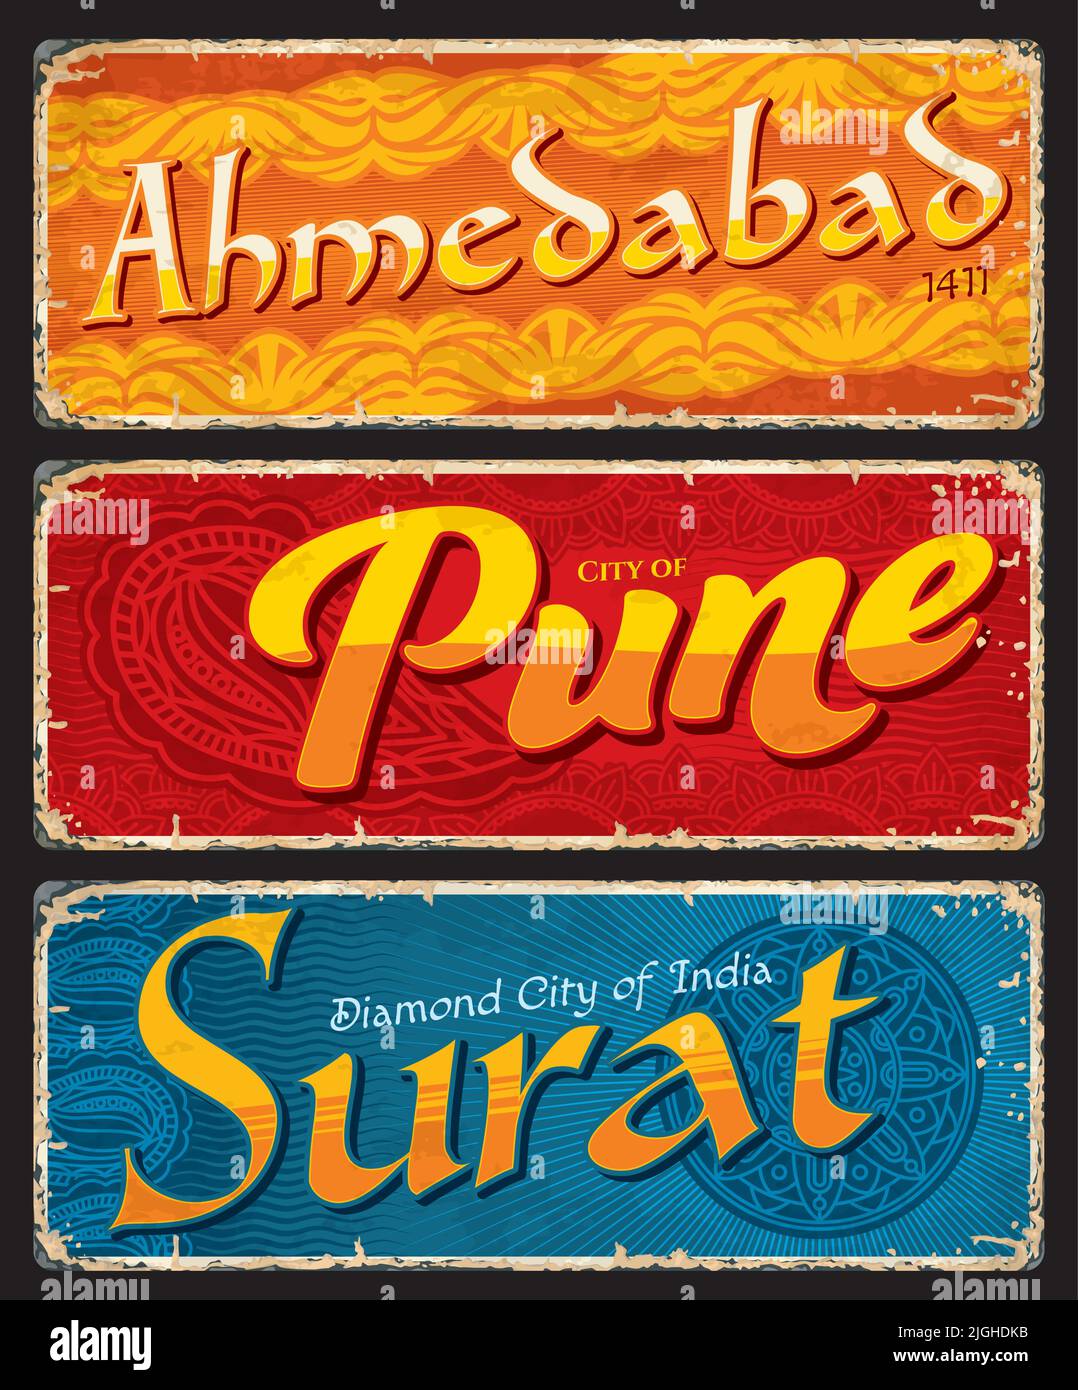 Ahmedabad, Pune, Surat, Indian city travel stickers and plates, vector vintage retro signs. India trip luggage labels or baggage tags and Indian vacations old posters or tin signs Stock Vector